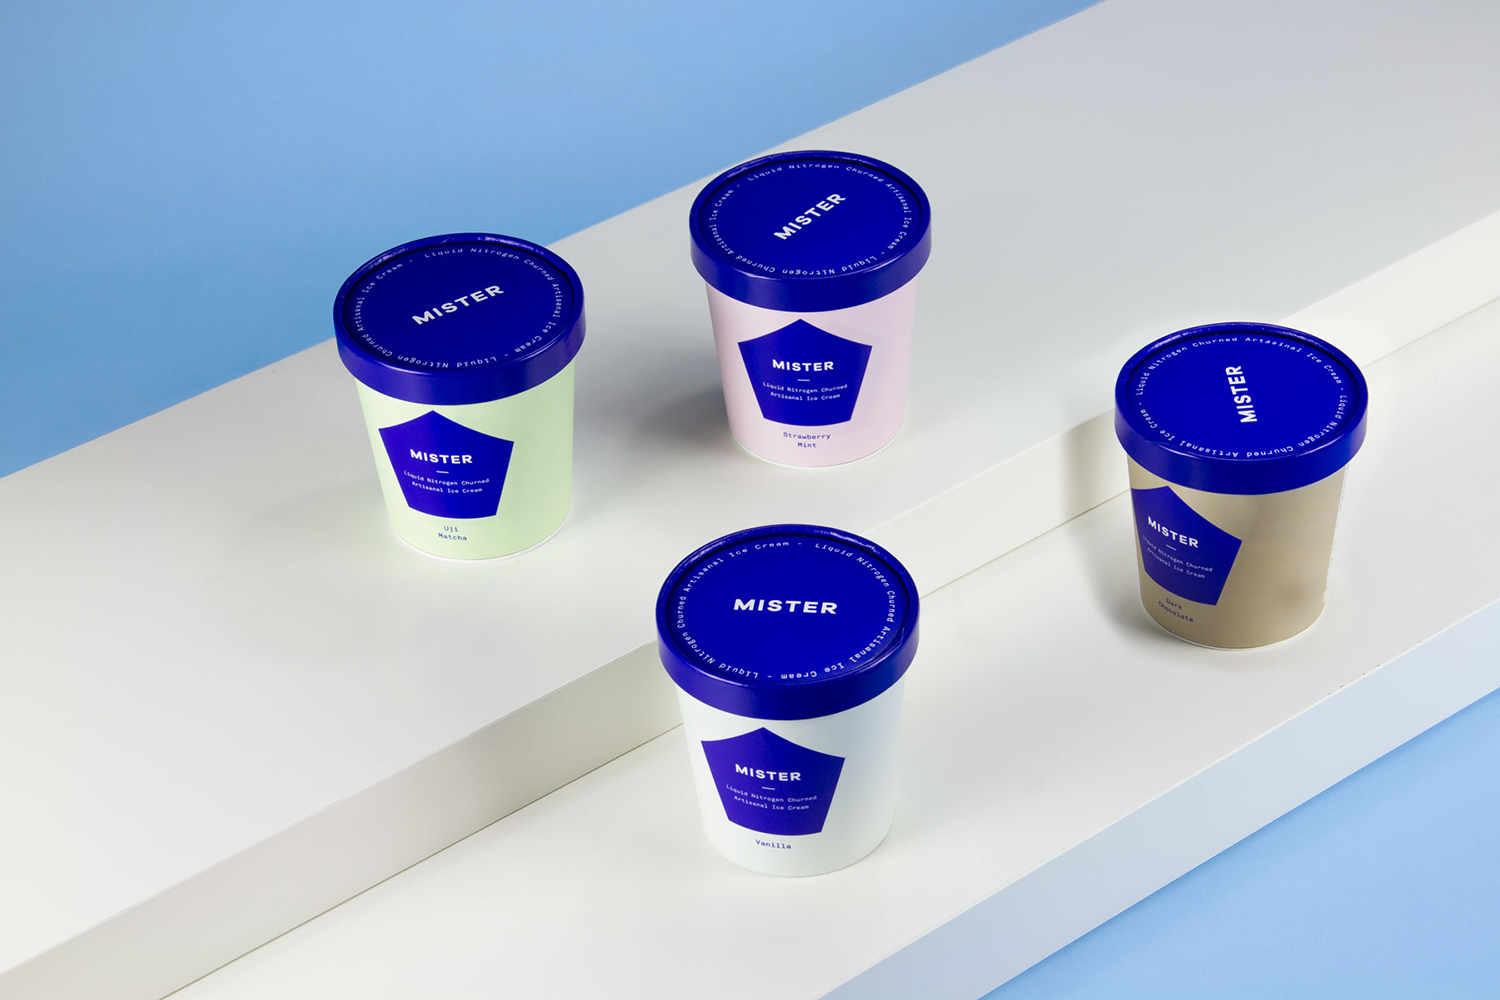 Brand identity and packaging by Brief for Vancouver-based all natural, artisanal and seasonal ice cream business Mister